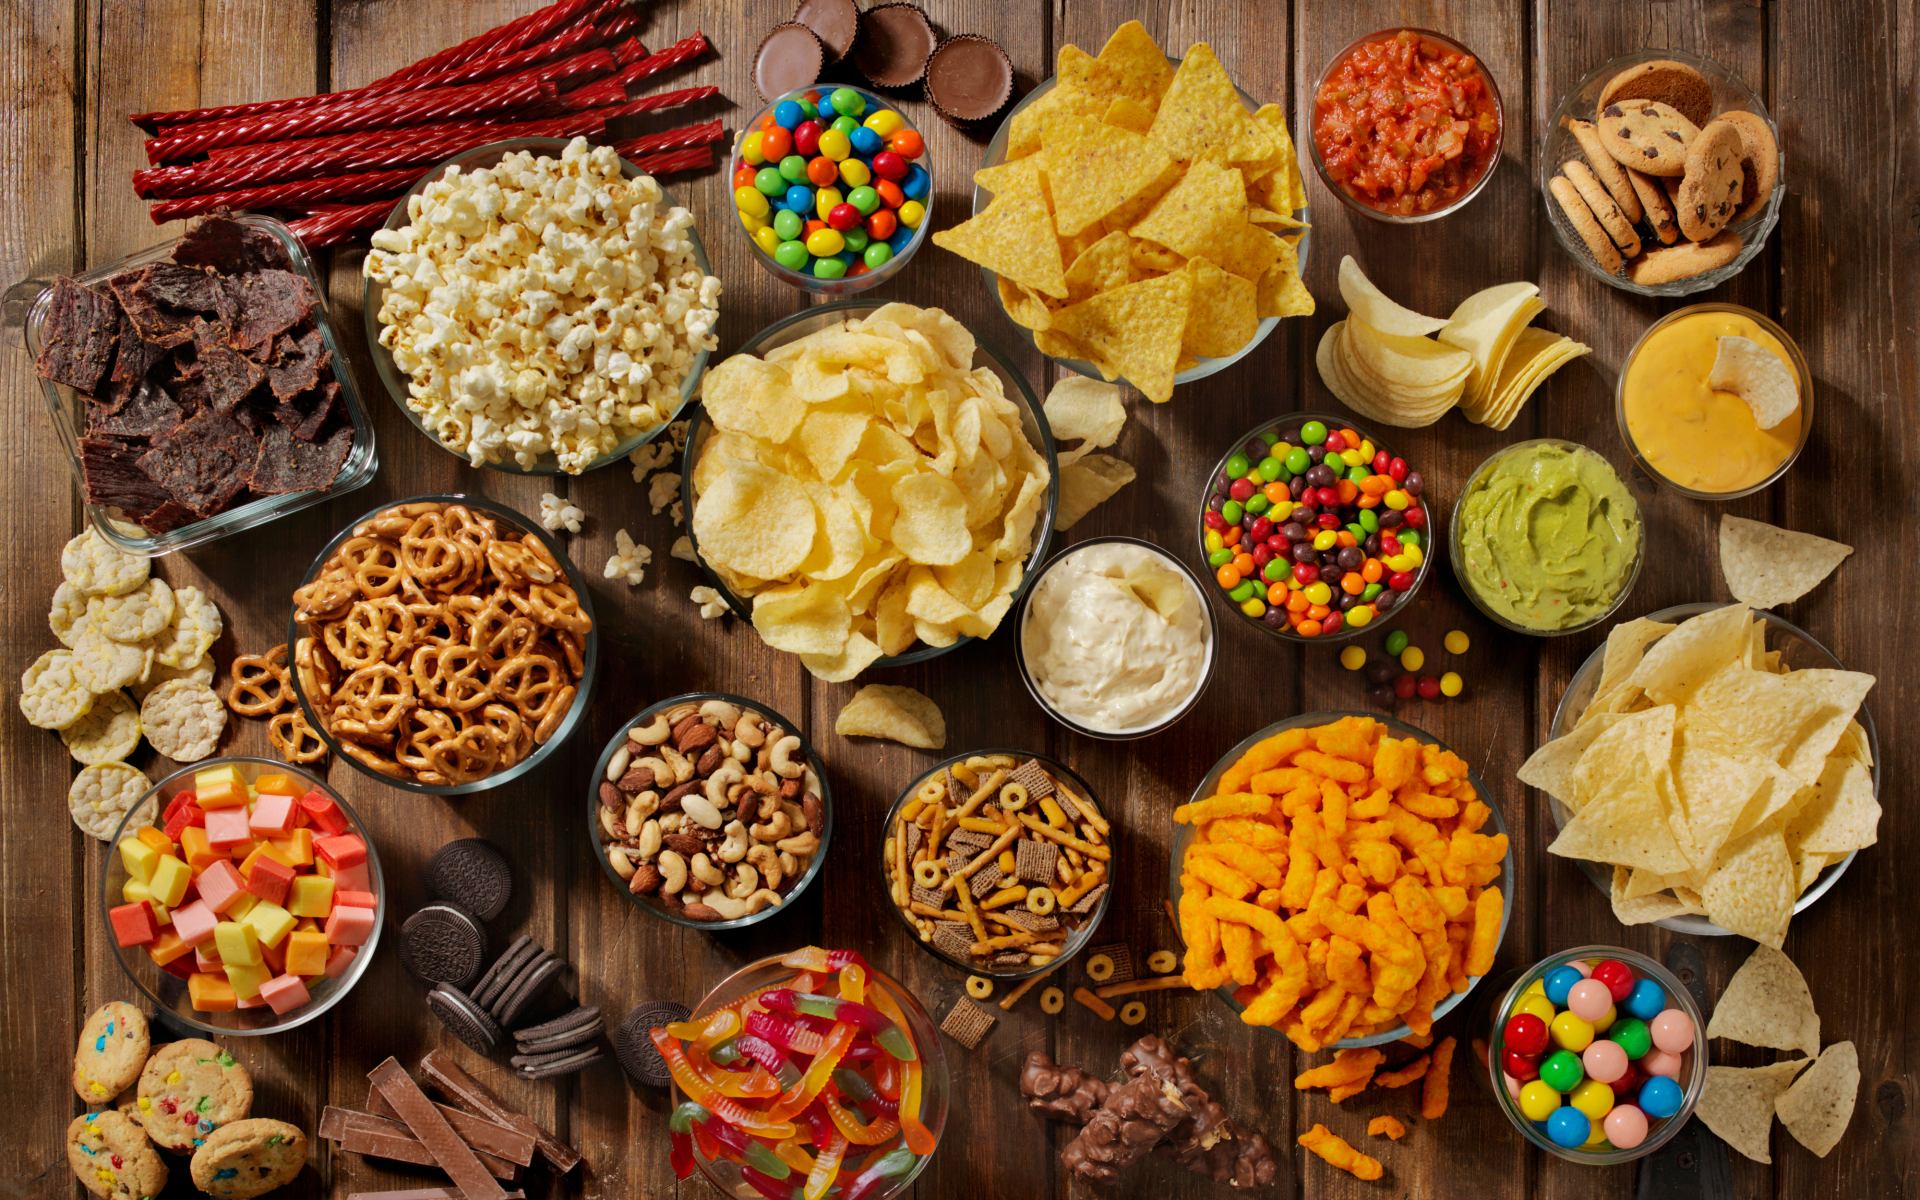 Overhead shot of a table full of snack foods